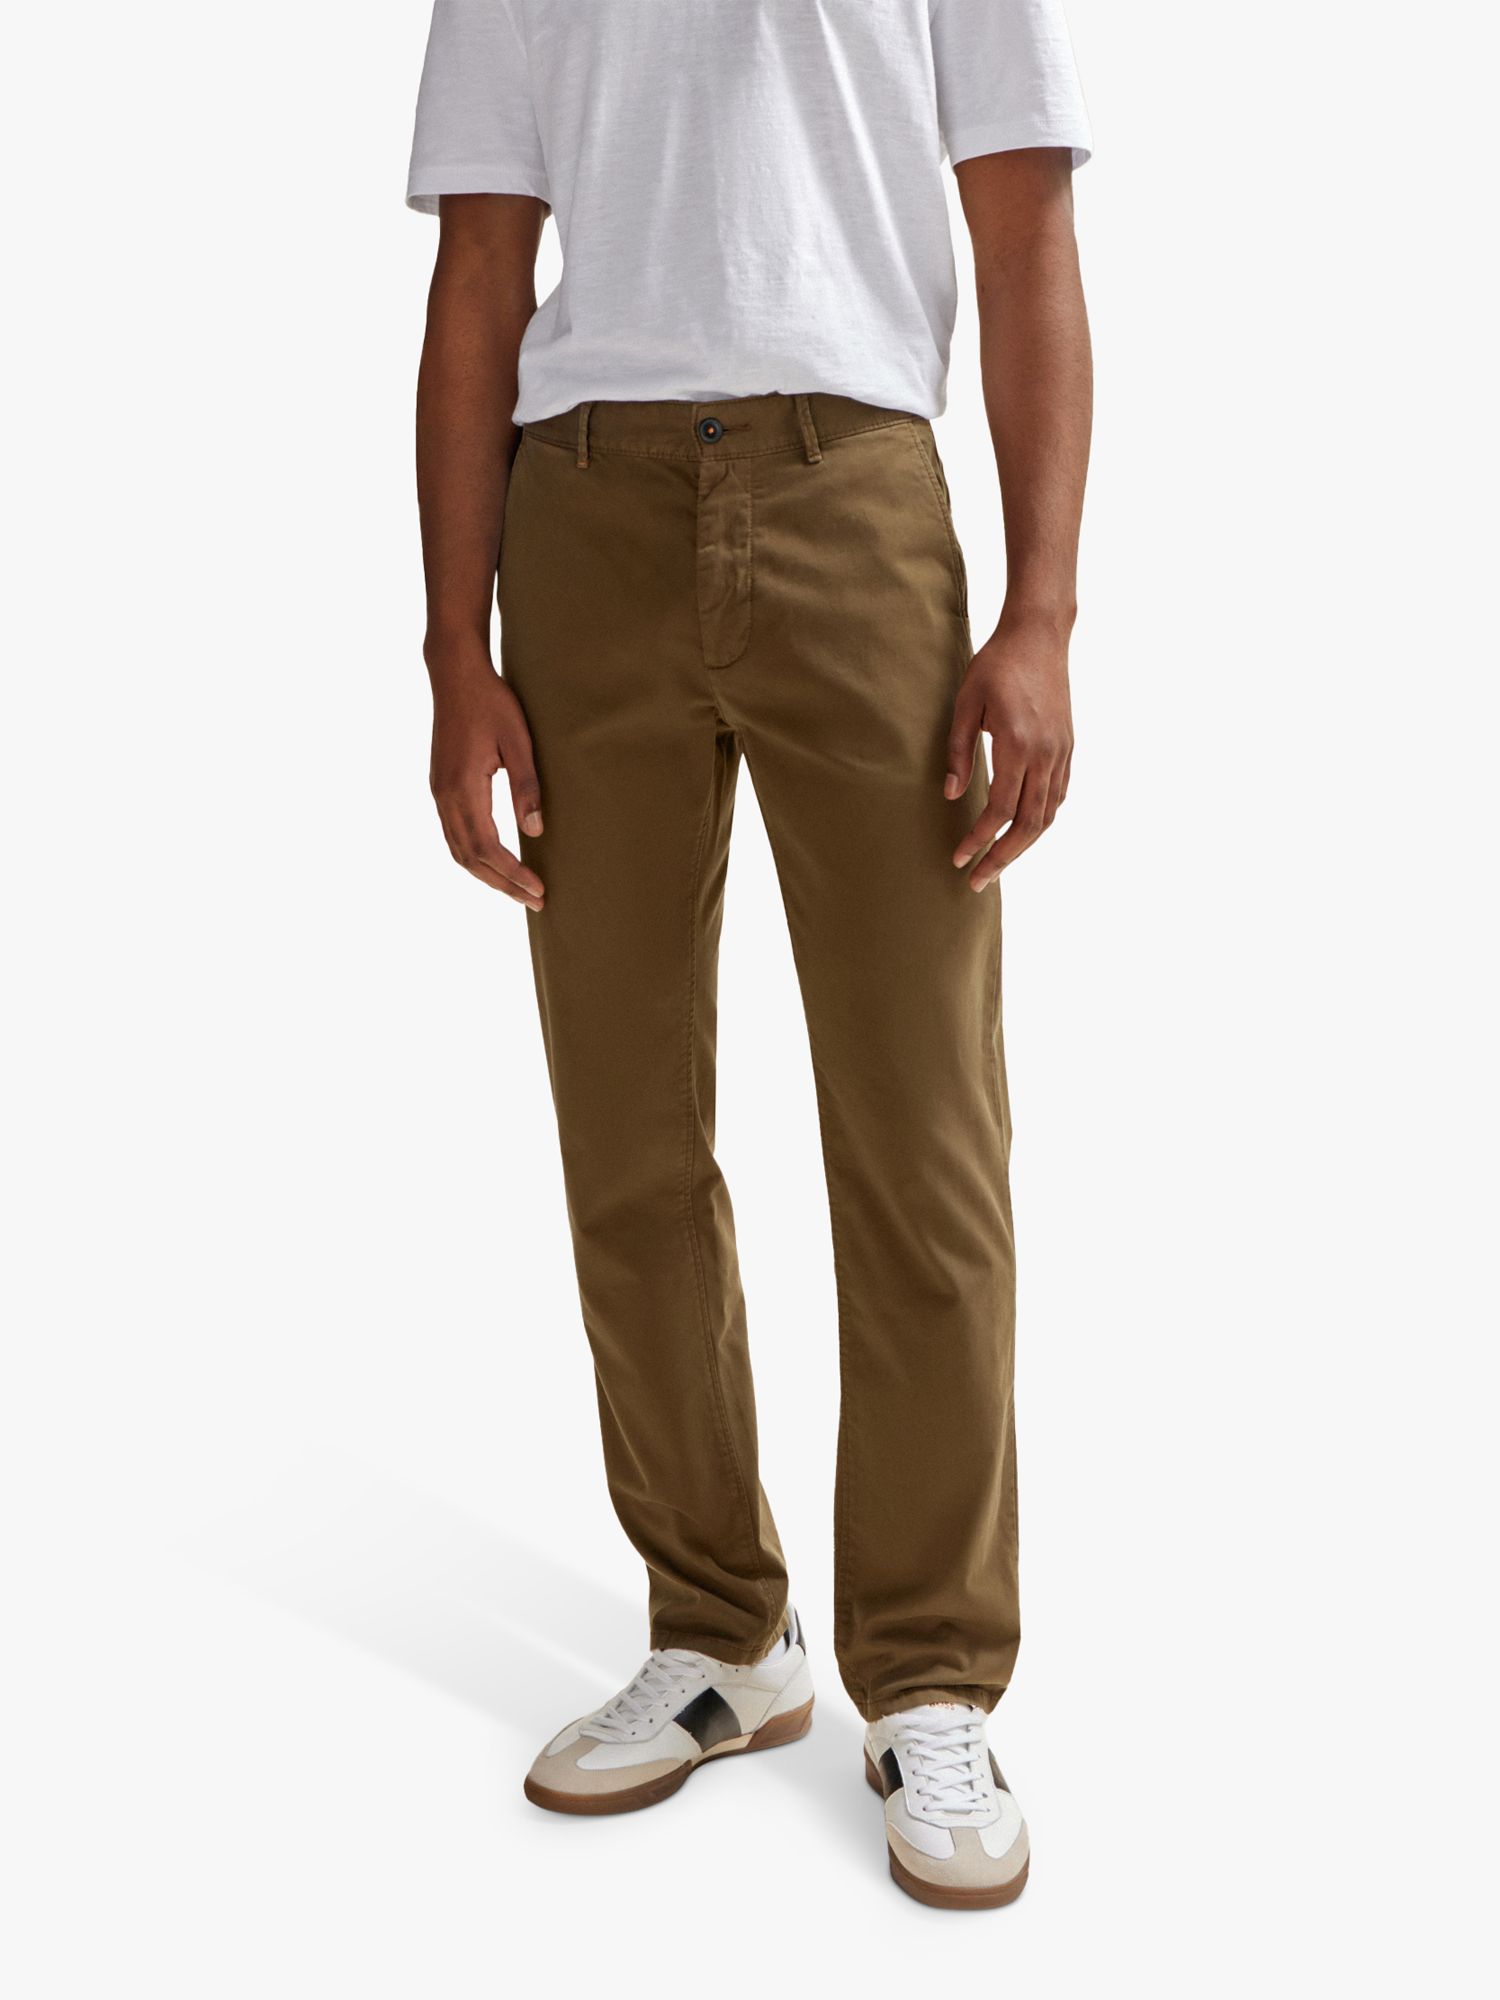 BOSS Slim Fit Chino Trousers, Green at John Lewis & Partners